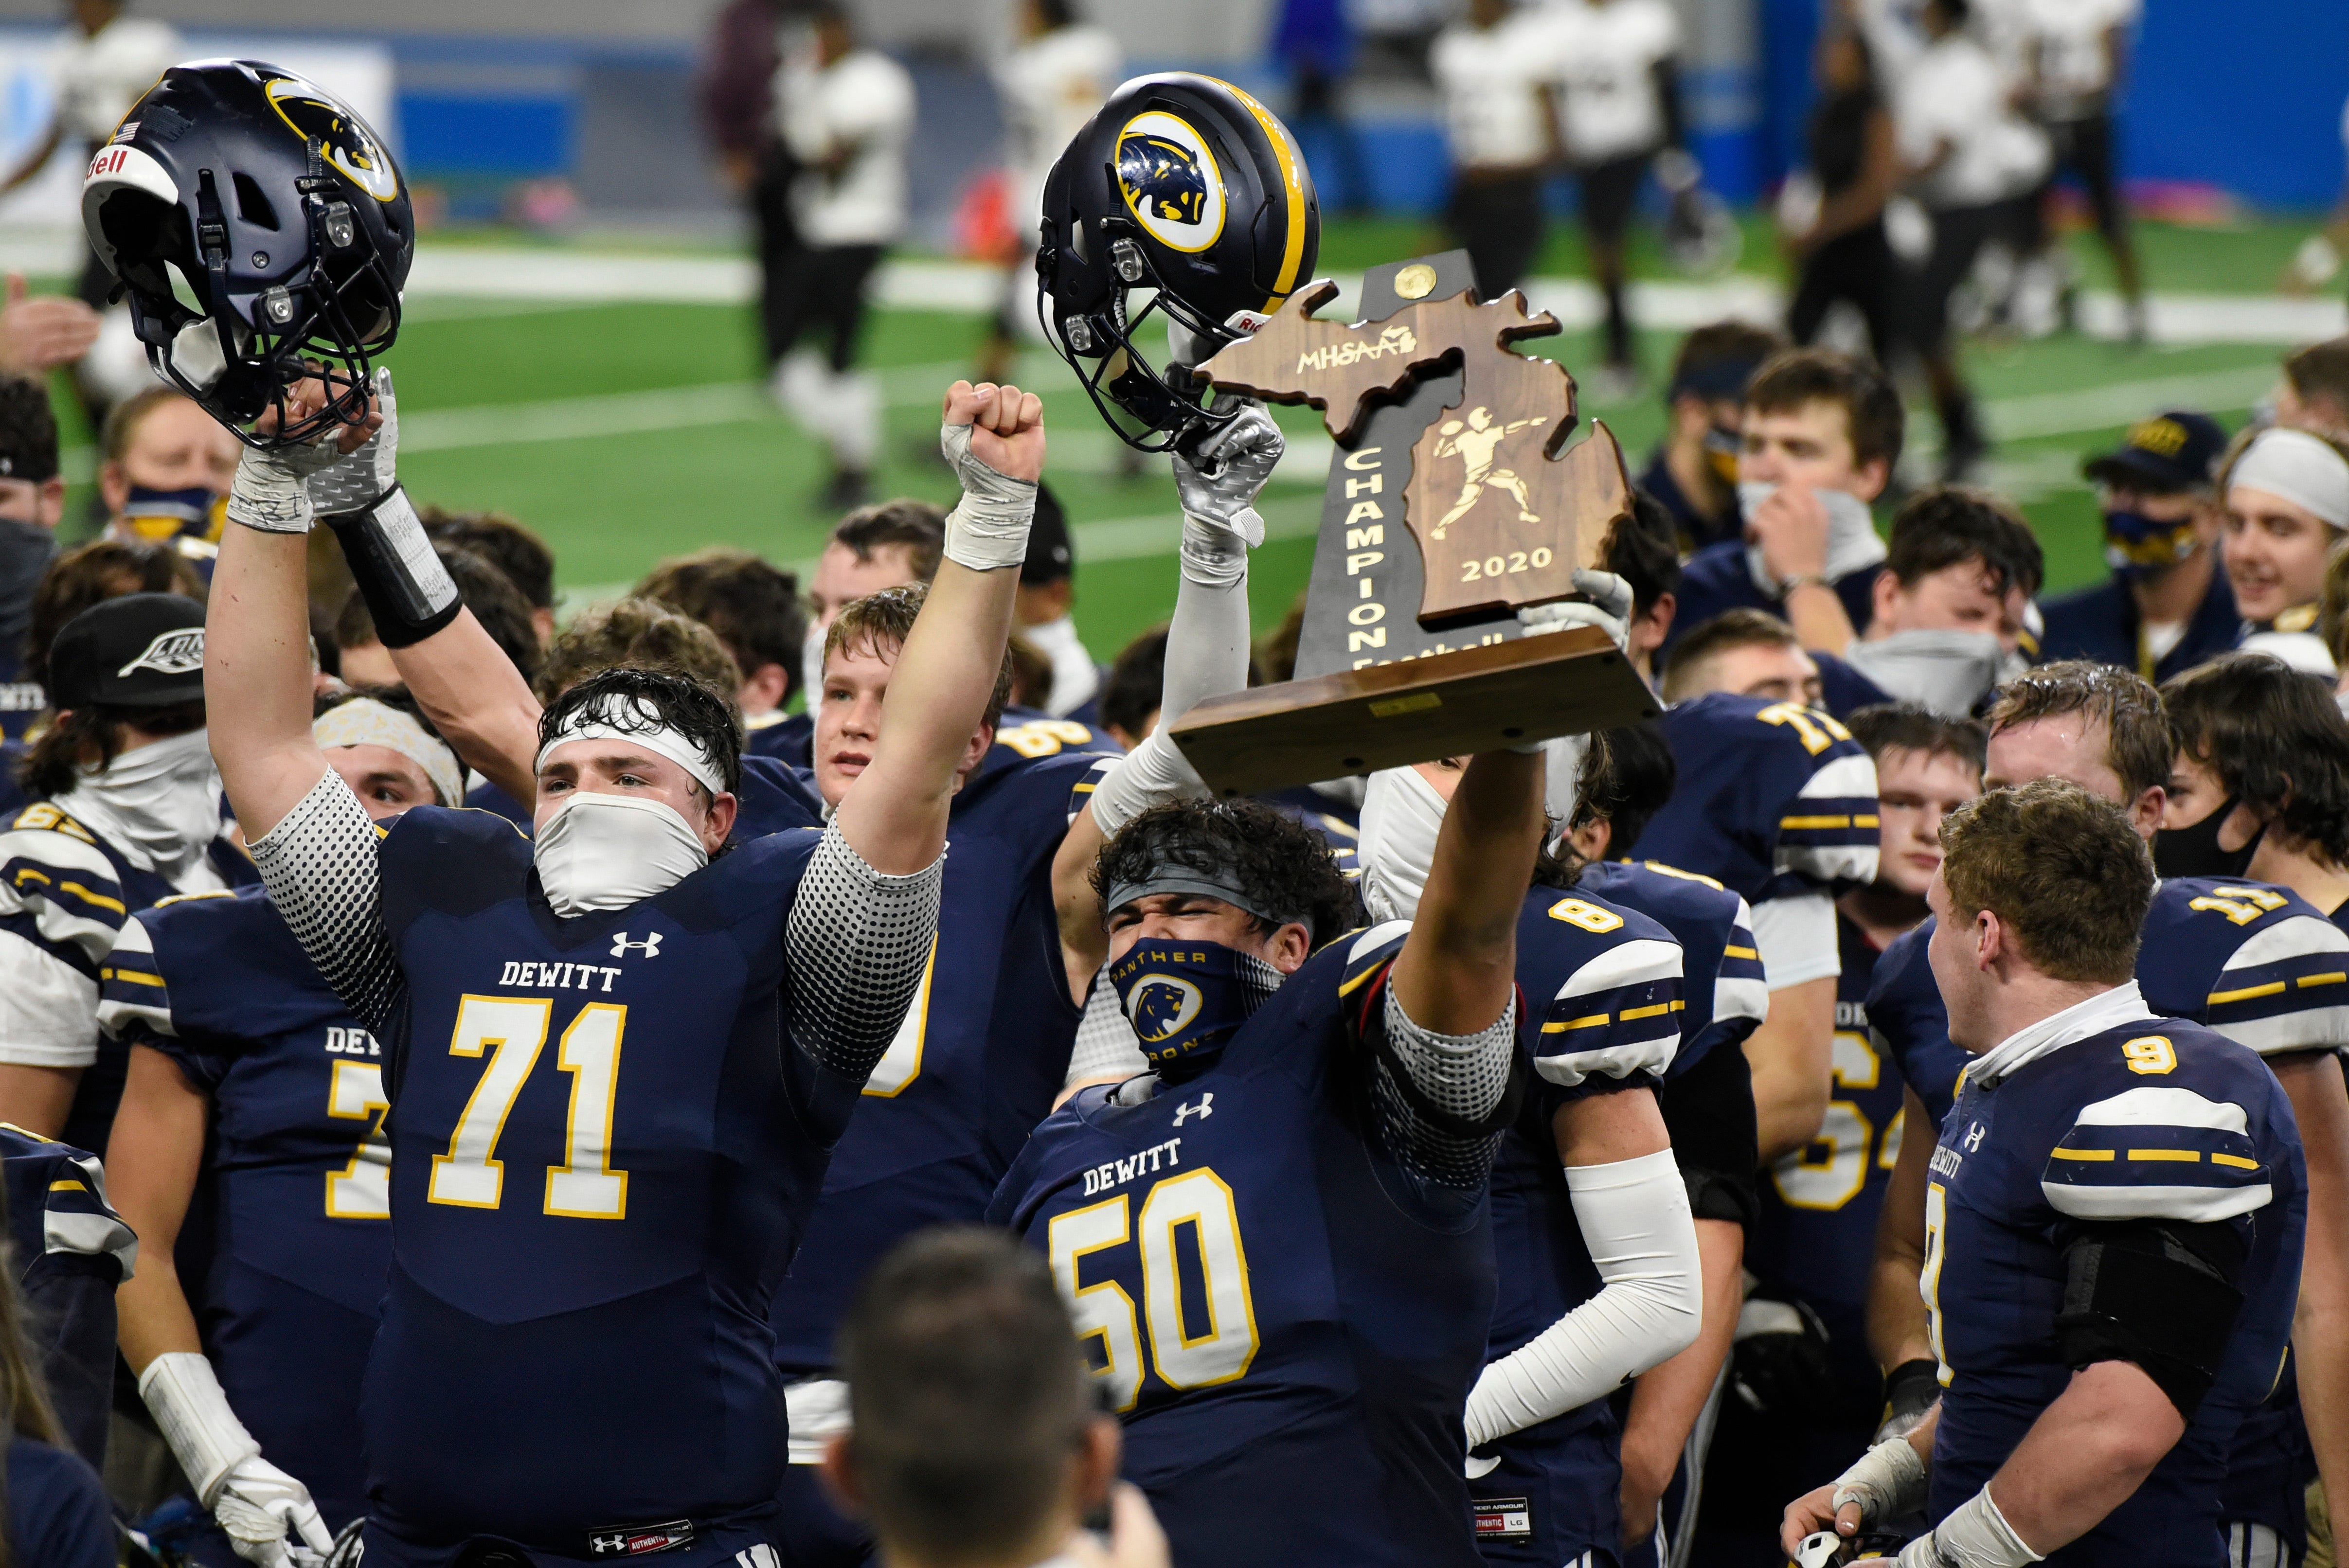 DeWitt lineman Conner Pochert (50) holds up the Division 3 championship trophy as his team celebrates defeating River Rouge 40-30.